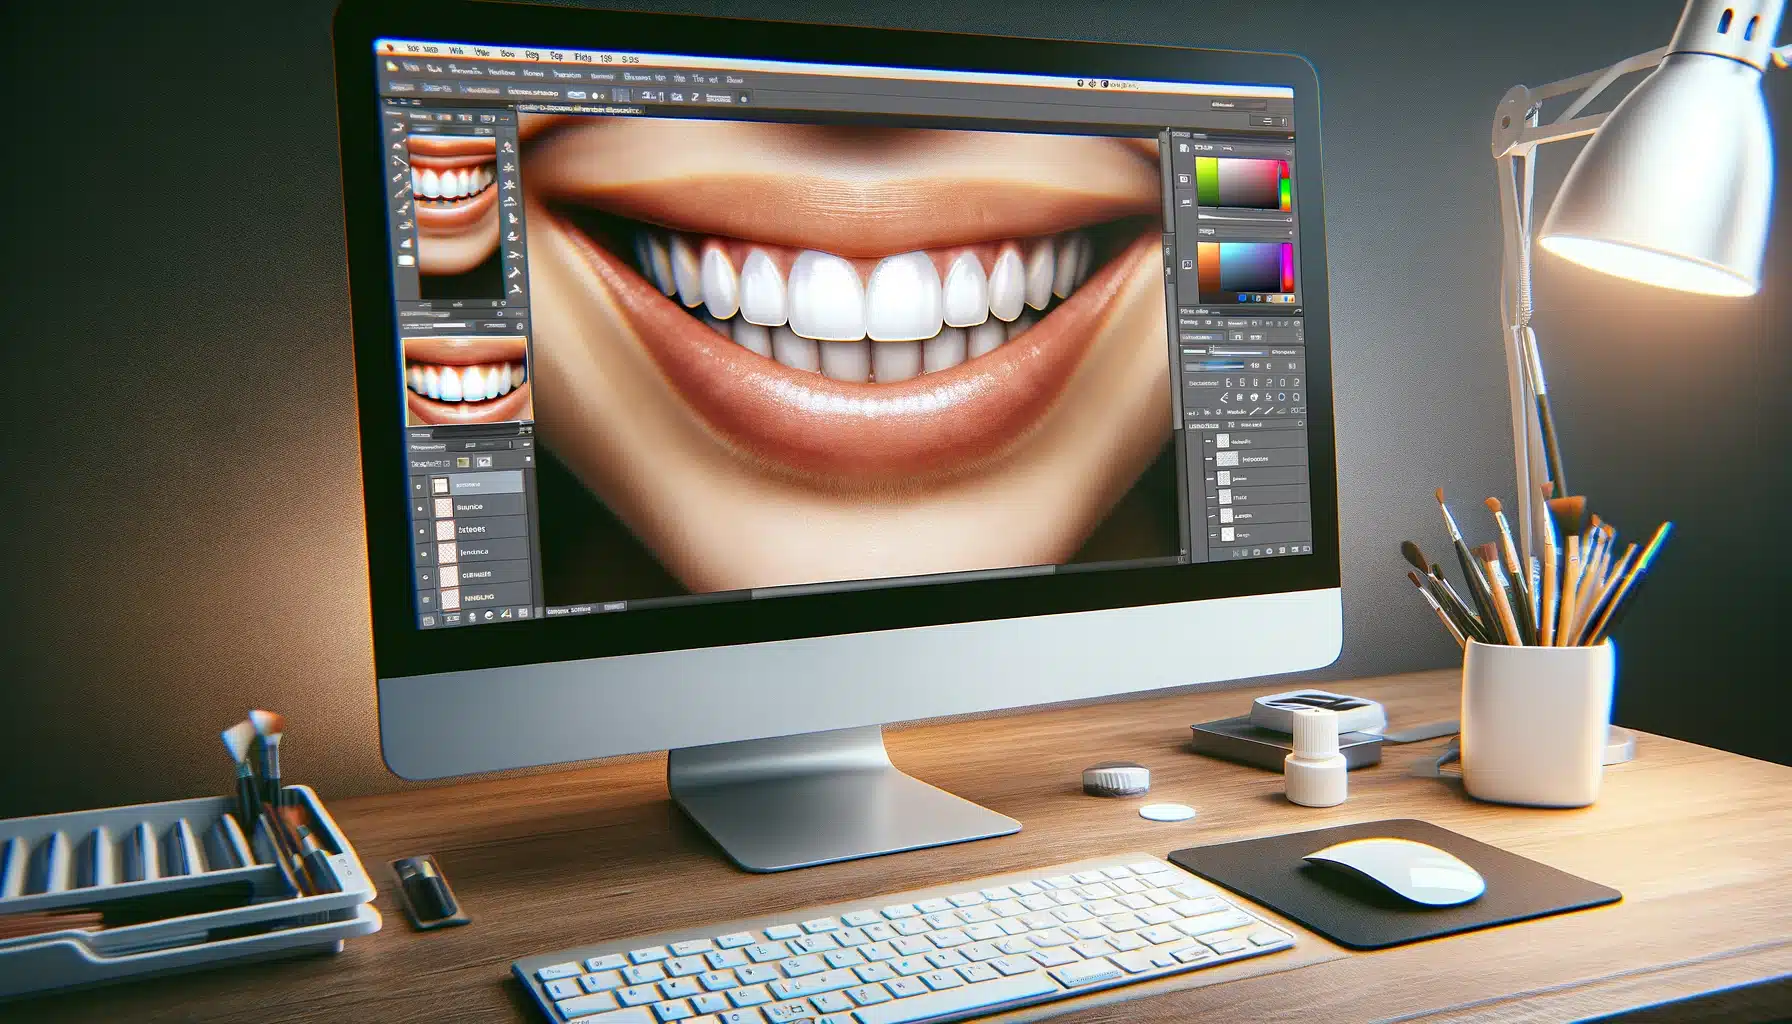 A computer screen showing a Photoshop interface with a close-up image of teeth being whitened. Tools like layers, hue/saturation adjustments, and the sponge tool are visible.